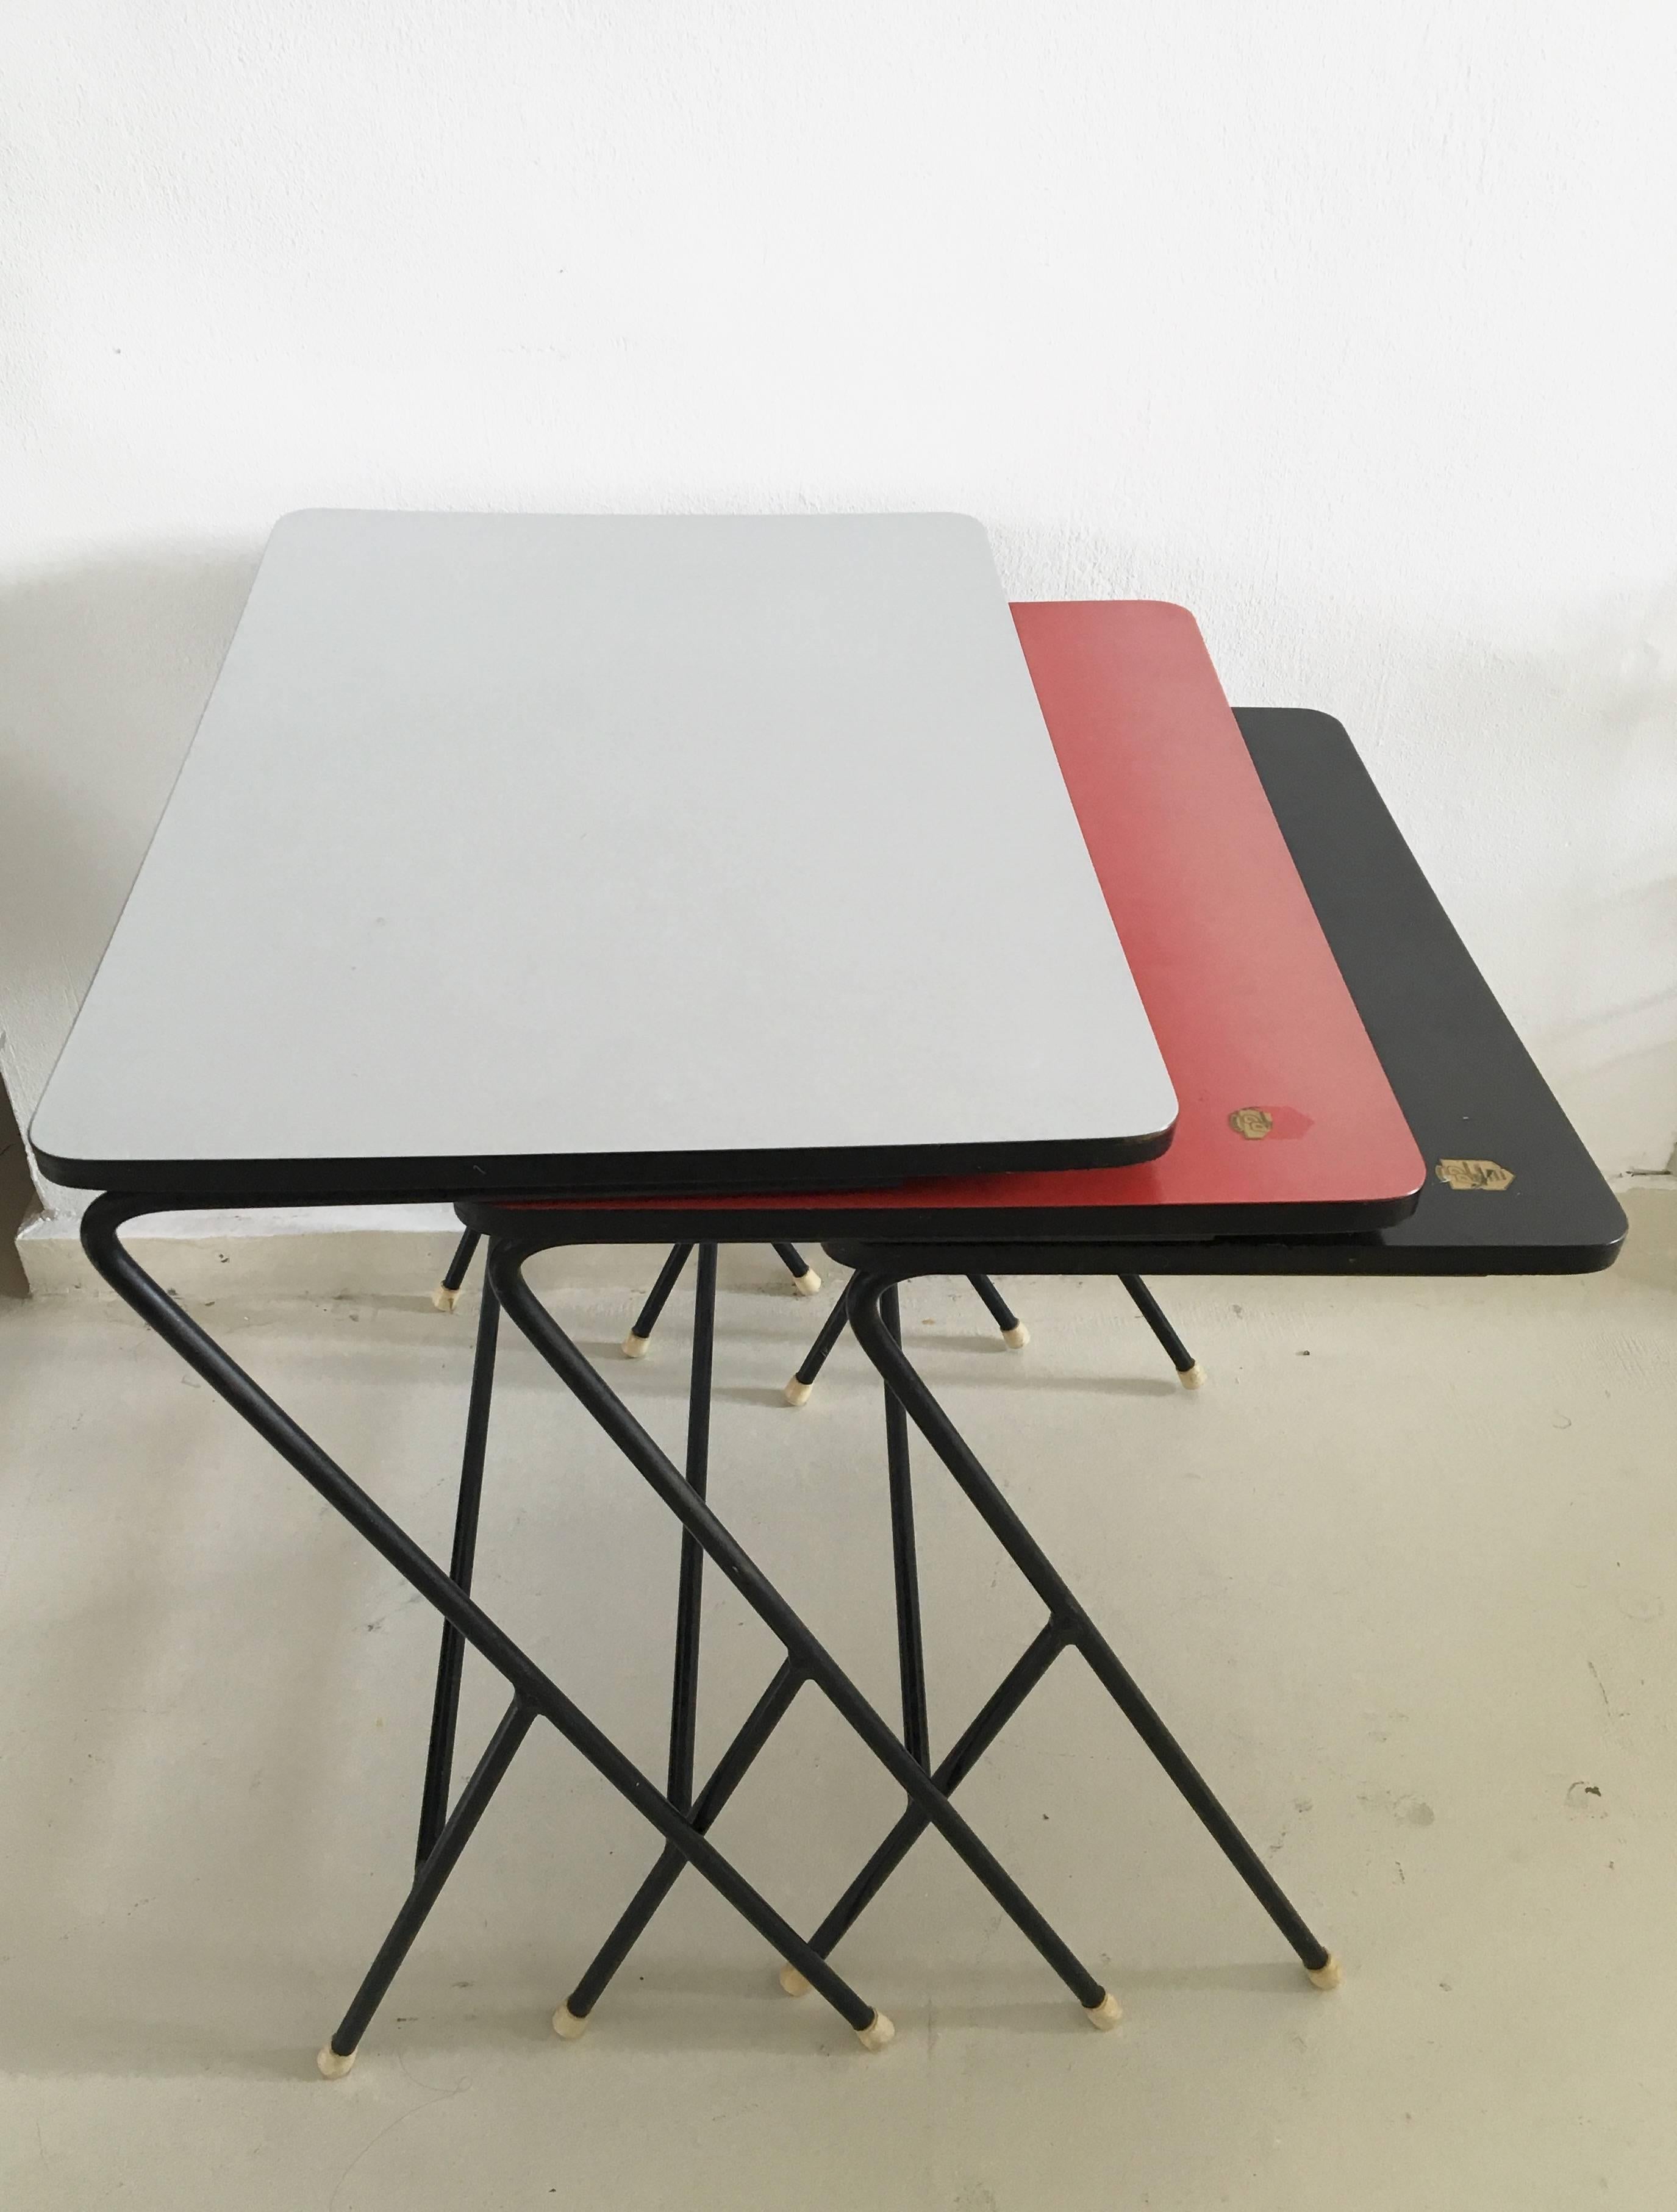 This set of three features a metal frame with Y legs and a Perstorp panel in three colors, which was made in Sweden. (Grey, red and black).

The tables remain in a very good condition with minor signs of age and use. The red table has some